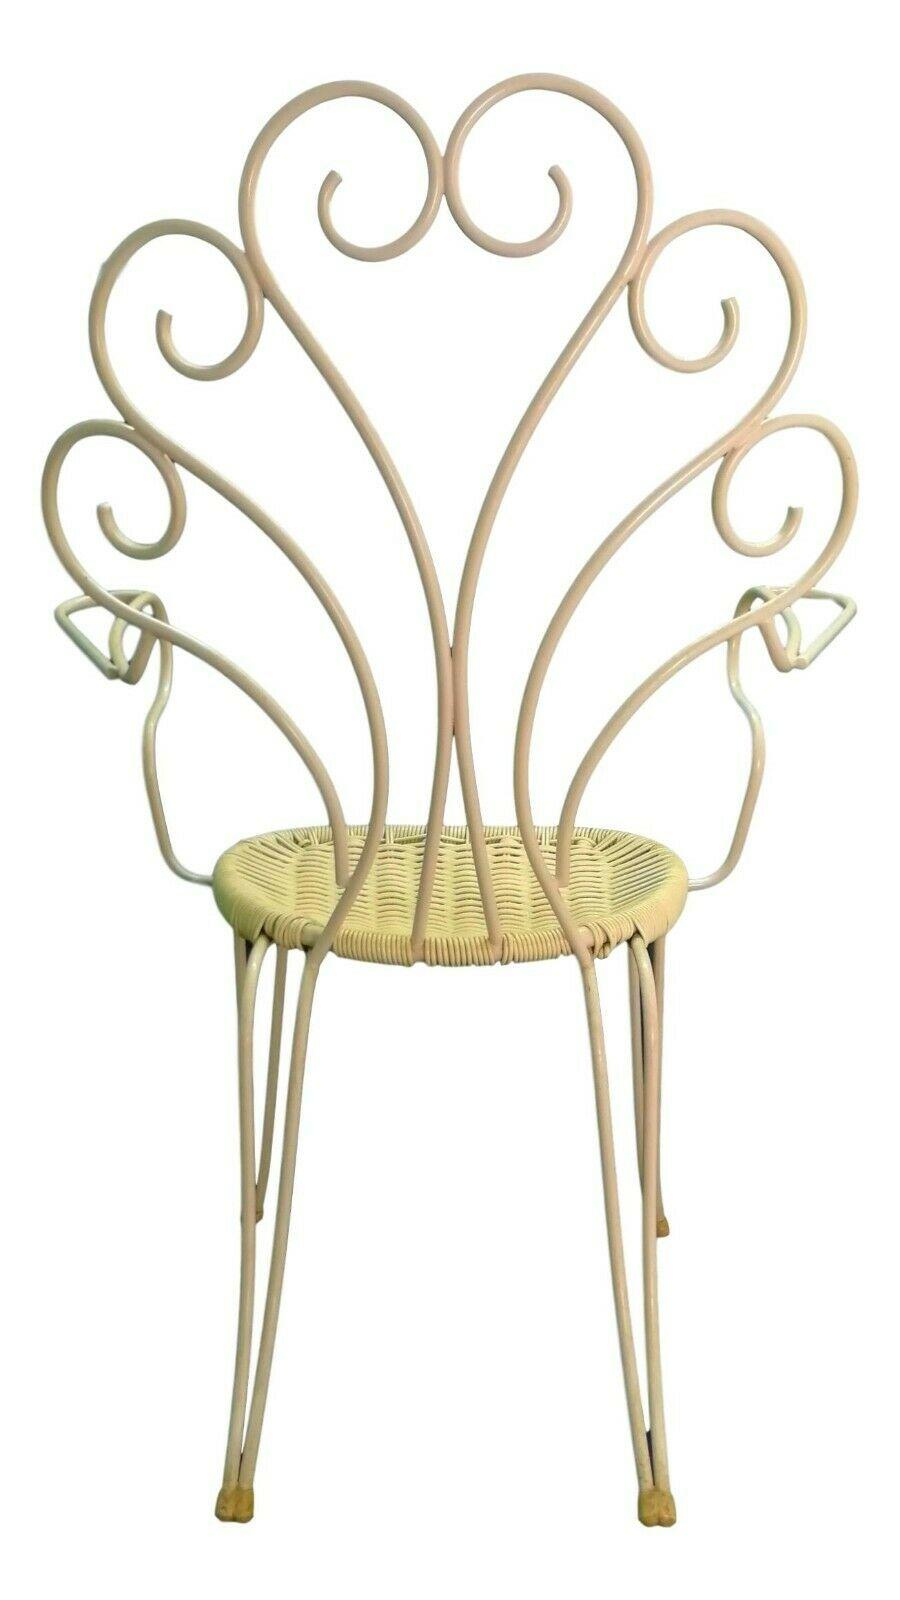 Splendid garden or bar armchair, original from the 1950s, made of scooby doo on a coated iron structure, with ergonomic armrests

measures one meter high, 72 cm wide and 48 cm deep, seat height 42 cm from the ground, in very good storage